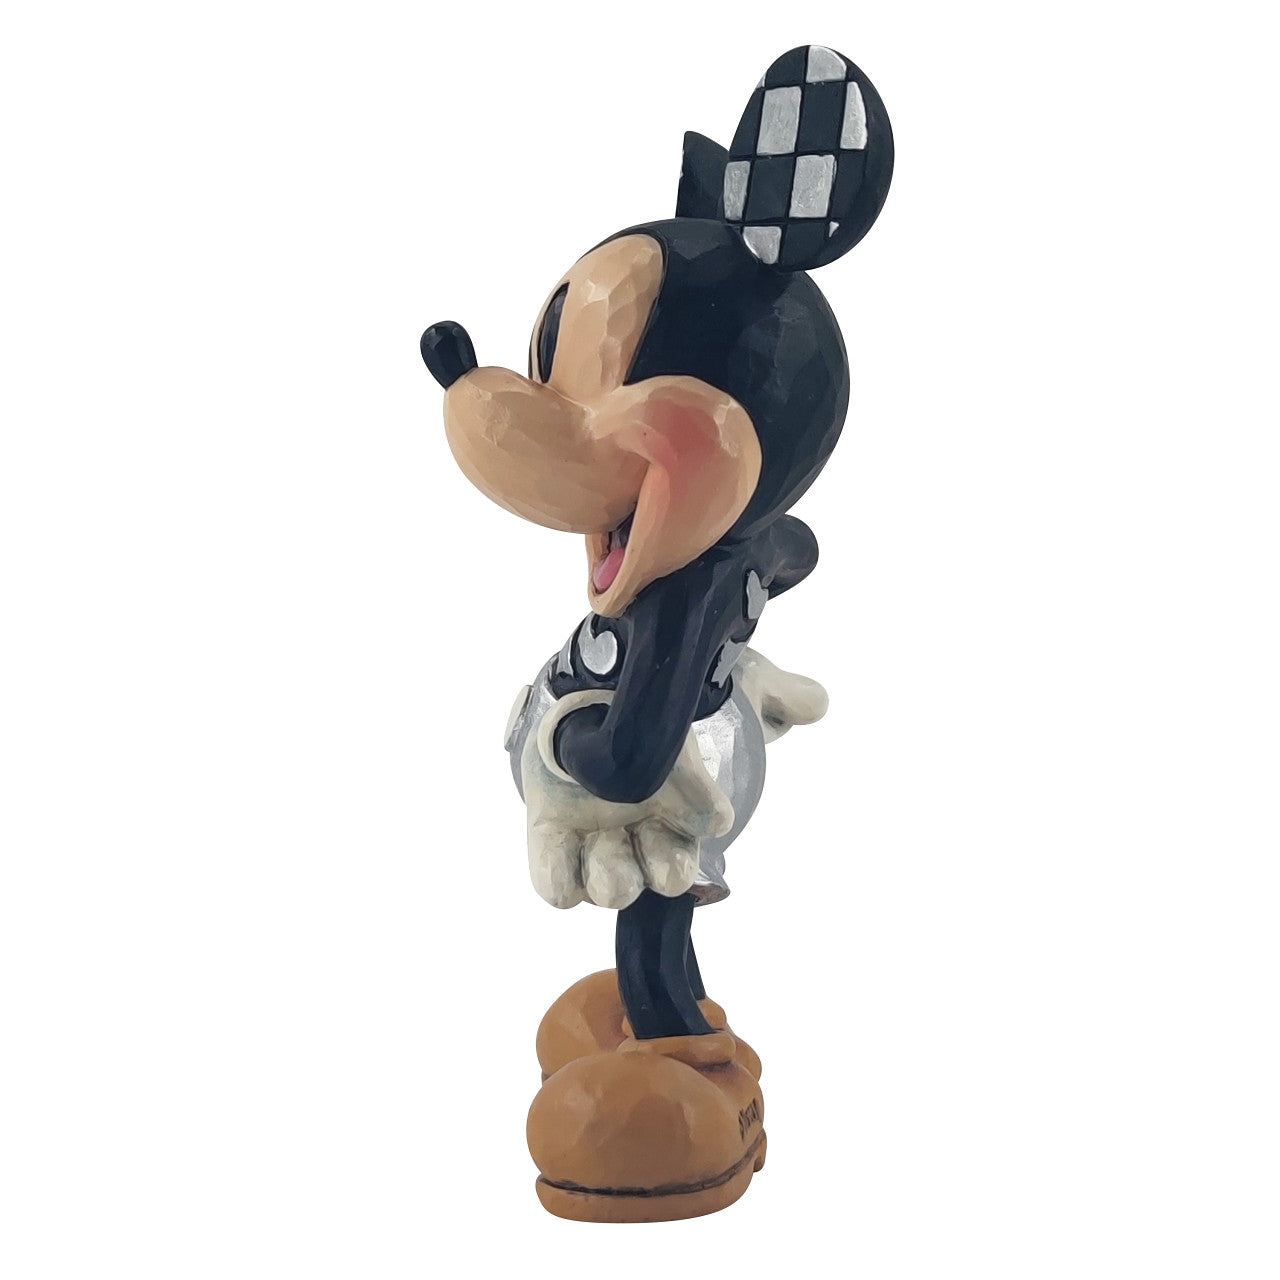 100 Years of Mickey Mouse